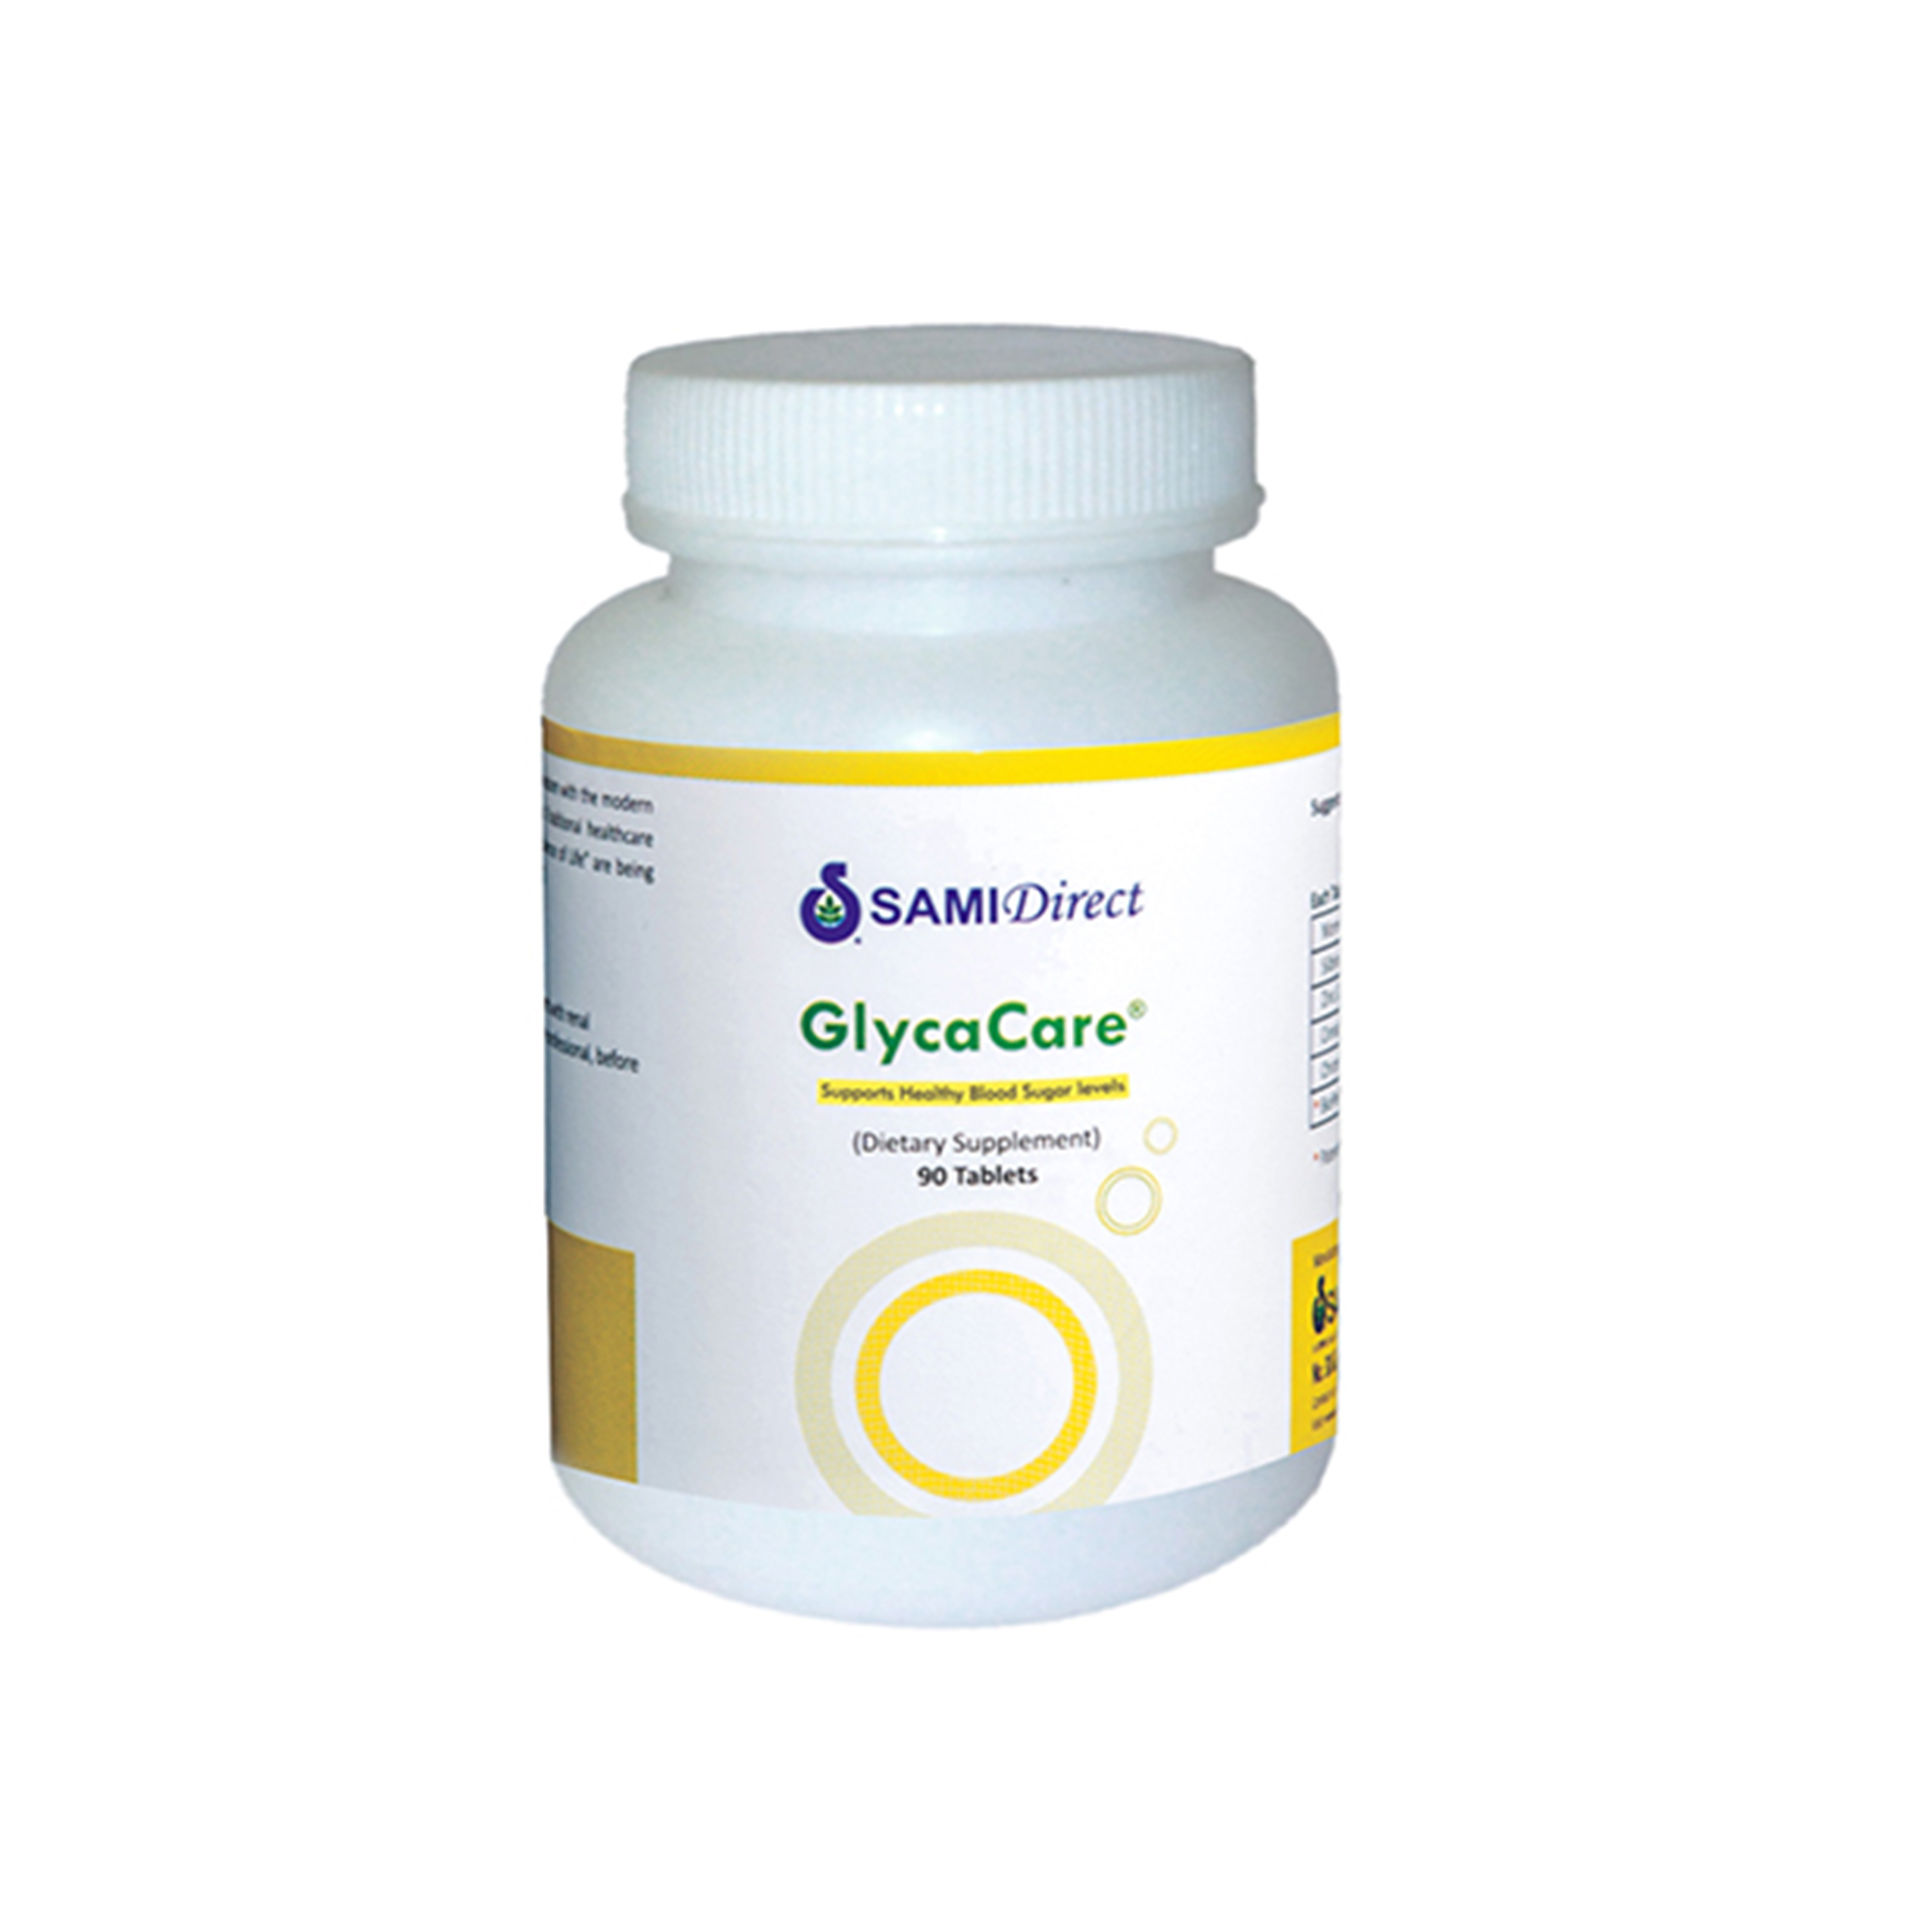 Buy Sami Direct Glycacare at Best Price Online